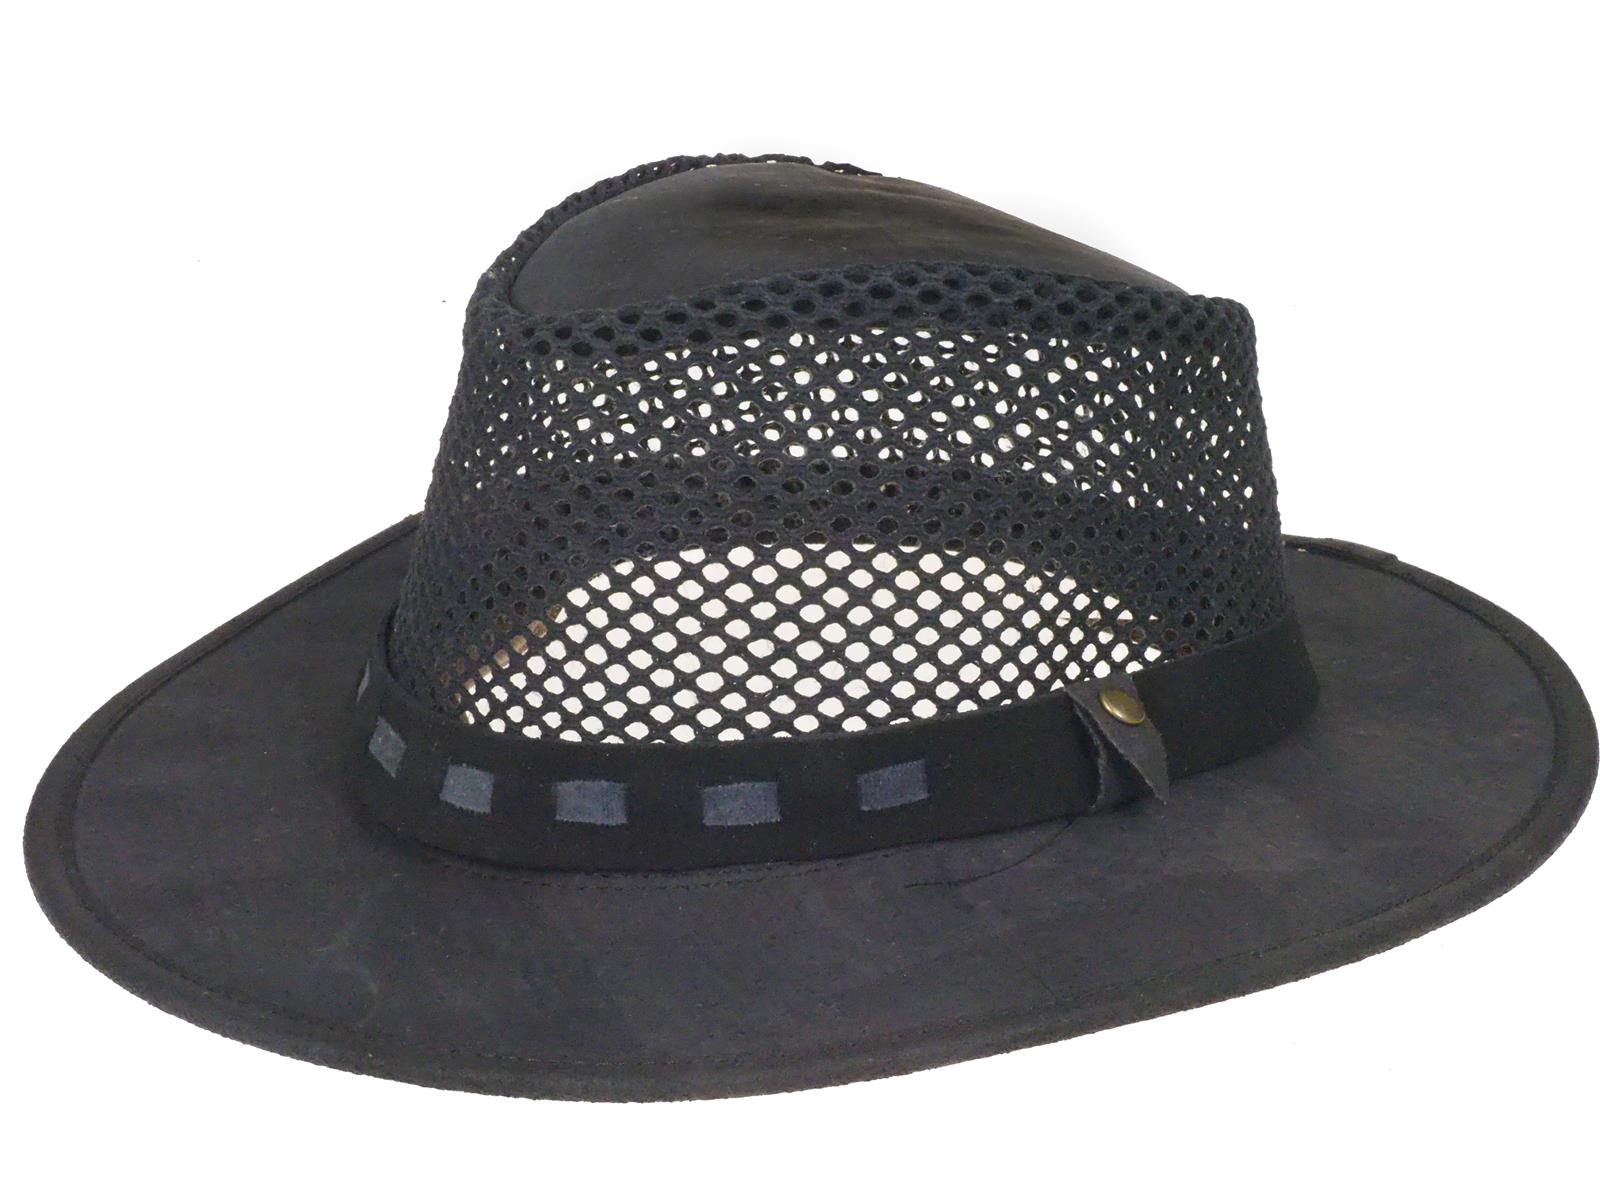 hat with mesh